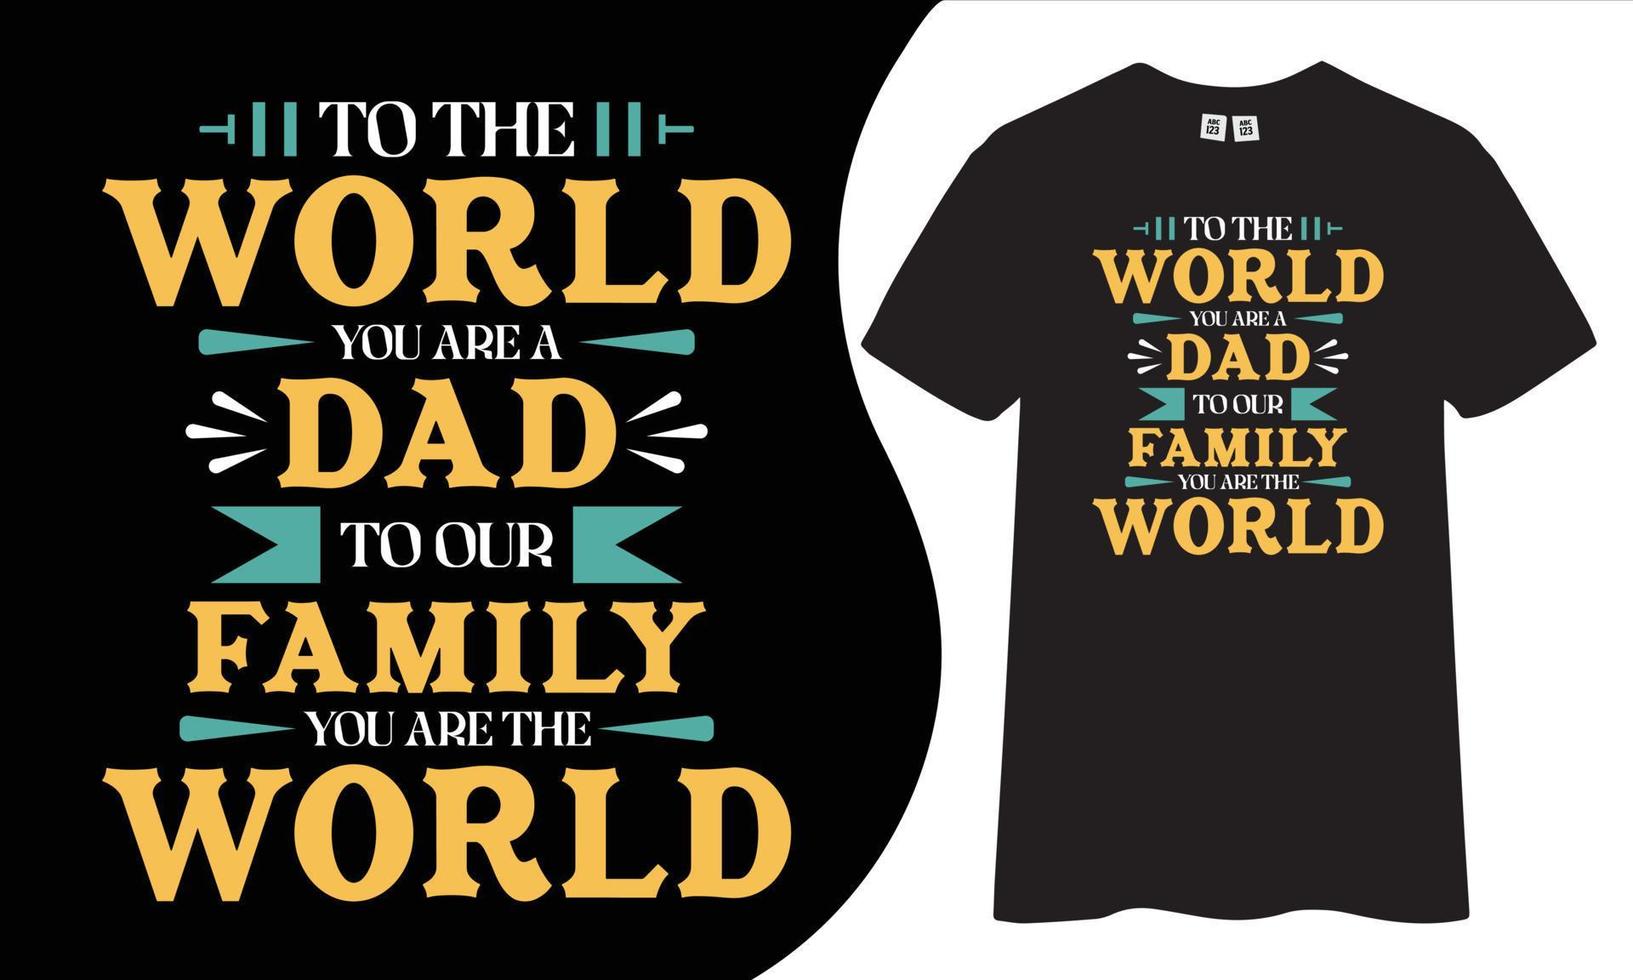 To the world you are a dad to our family you are the world t-shirt design. vector